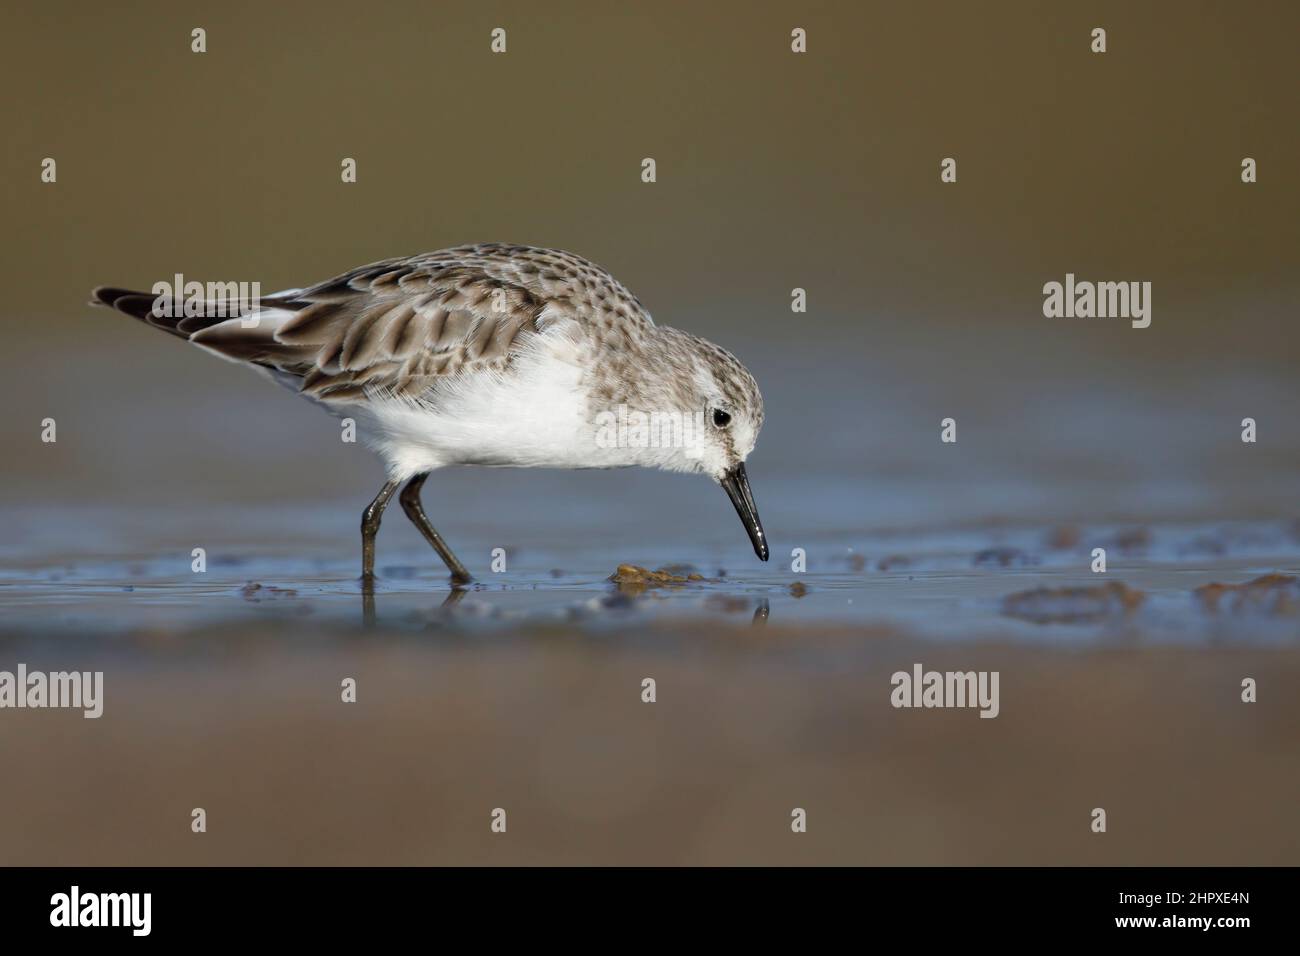 Little stint, Circeo National park (LT), Italy, March 2017 Stock Photo